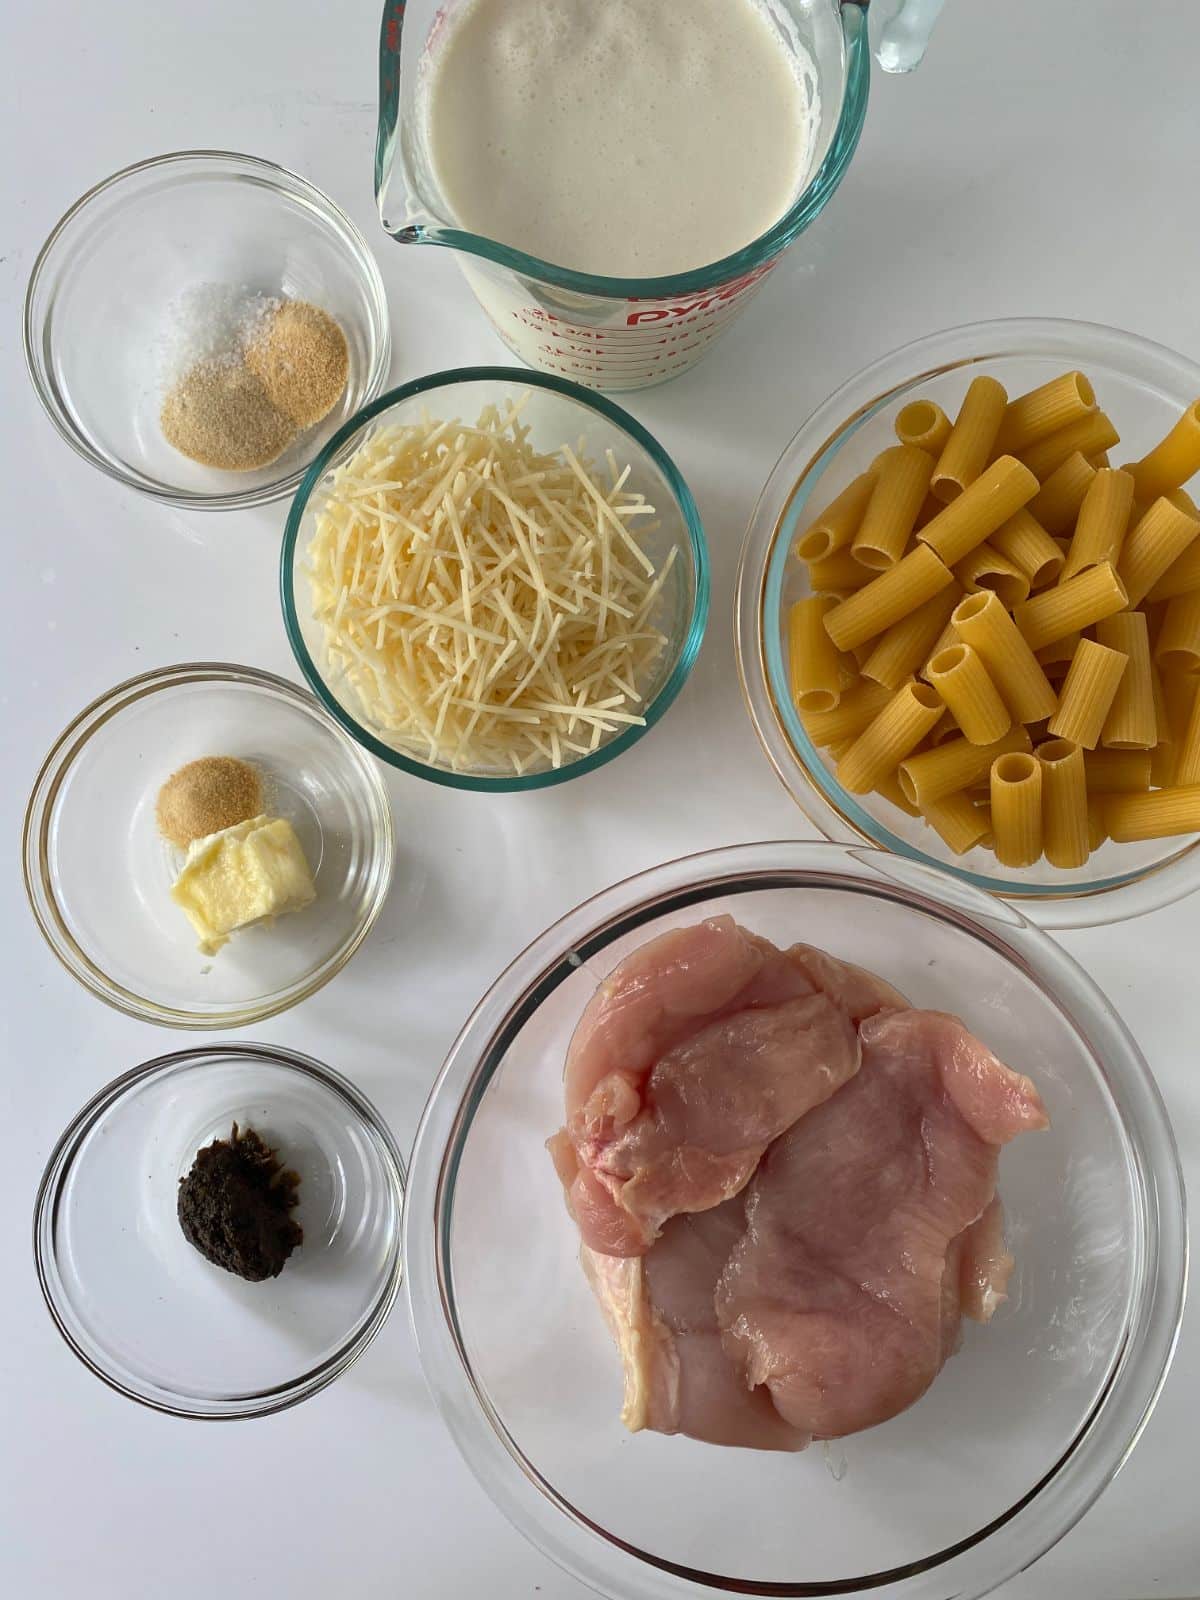 ingredients for rasta pasta in glass bowls on white table